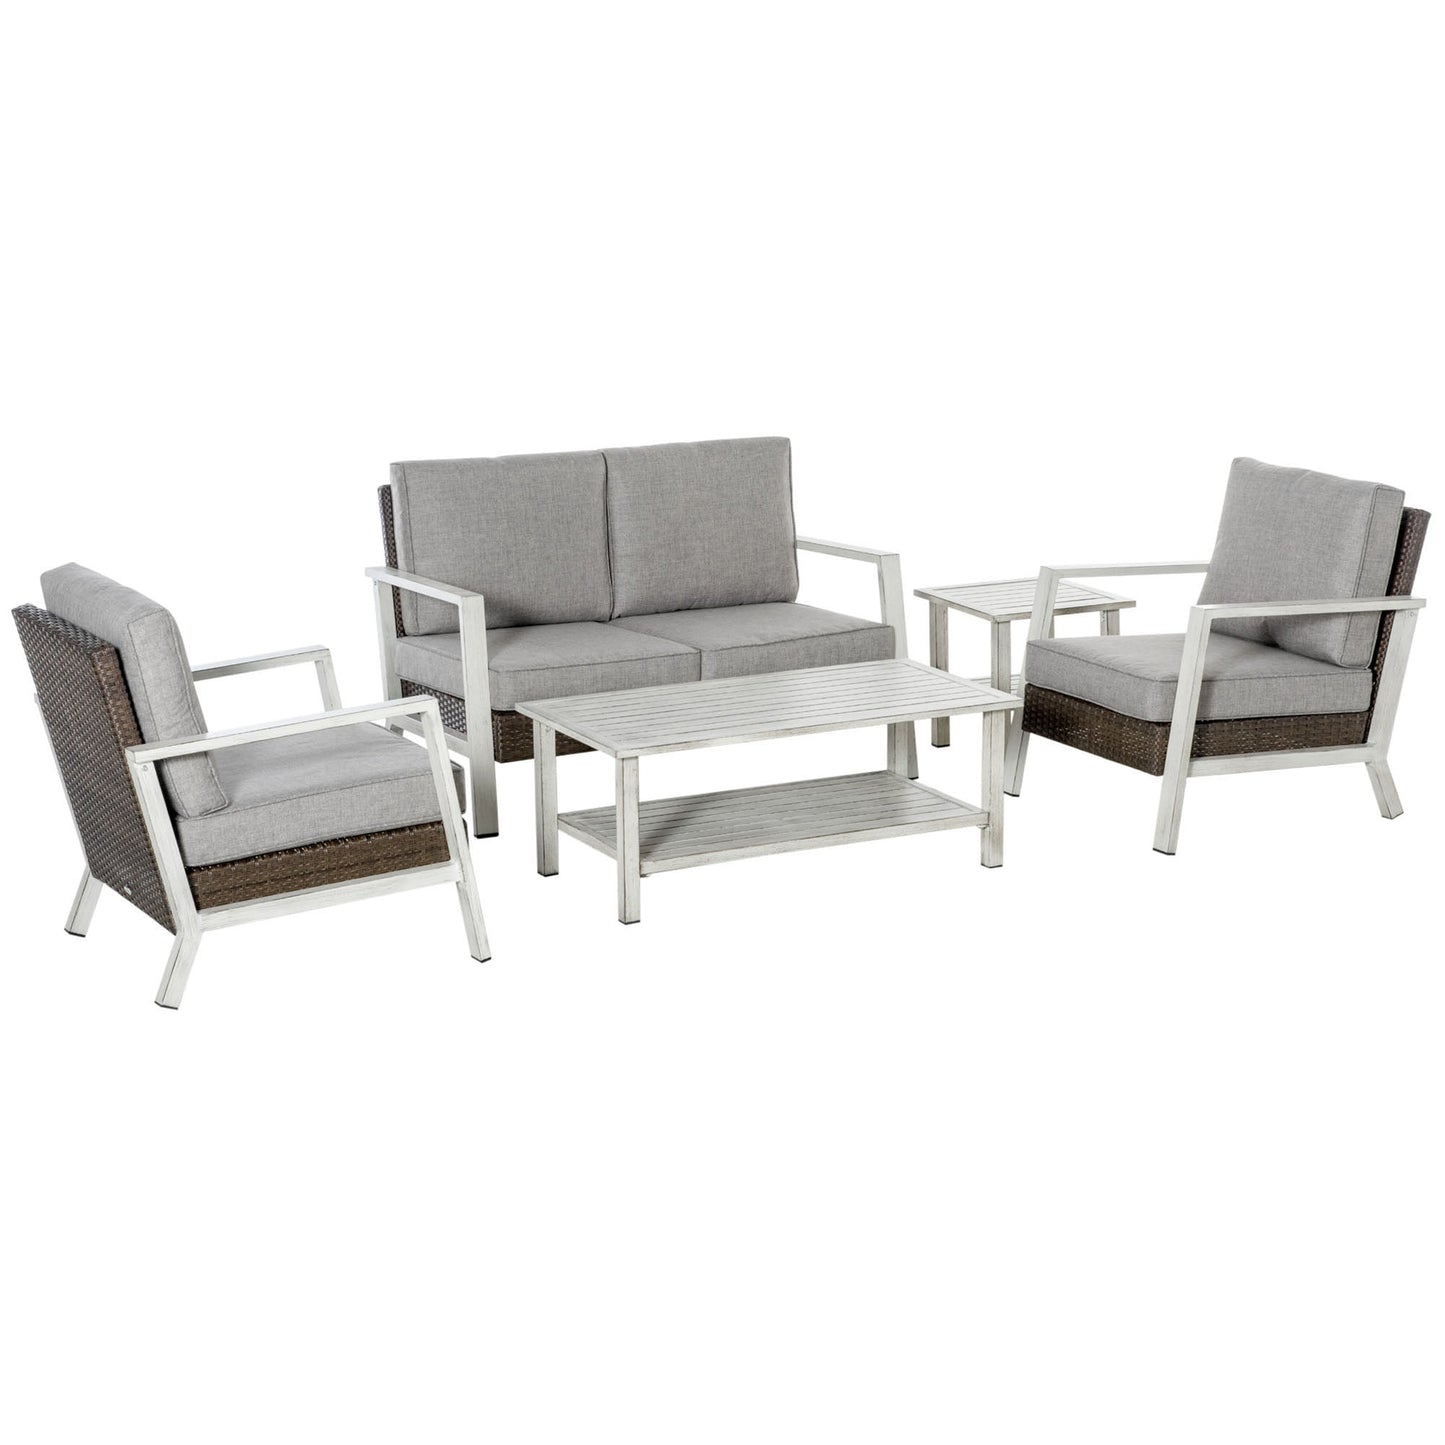 Outdoor and Garden-5 Pieces Patio Wicker Conversation Sets, Outdoor PE Rattan Loveseat Furniture, Two-tier Coffee Table and Side Table, Beige - Outdoor Style Company